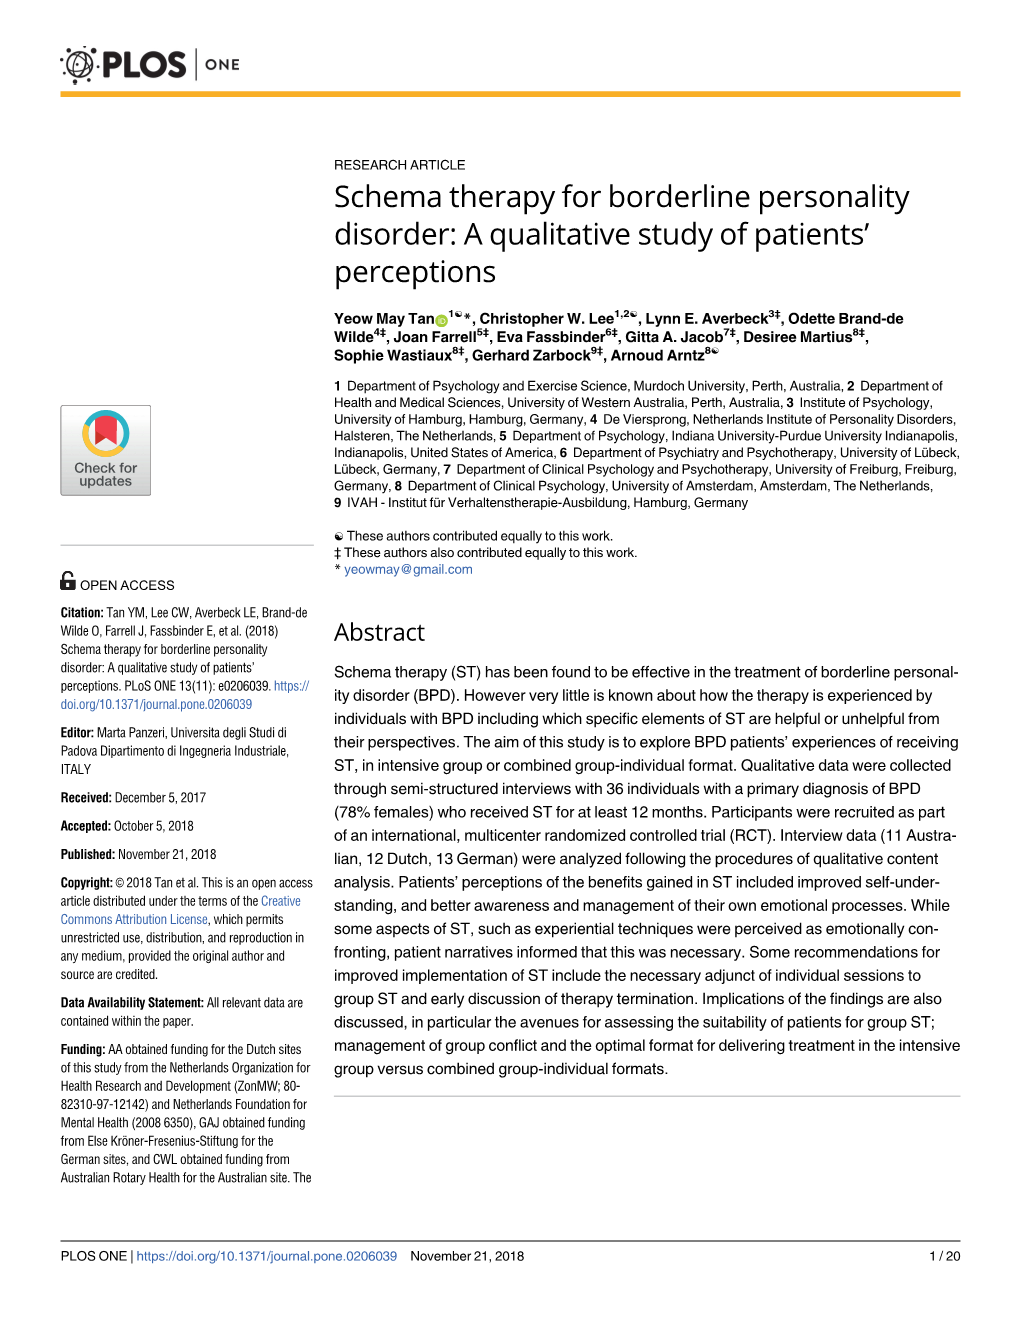 Schema Therapy for Borderline Personality Disorder: a Qualitative Study of Patients’ Perceptions